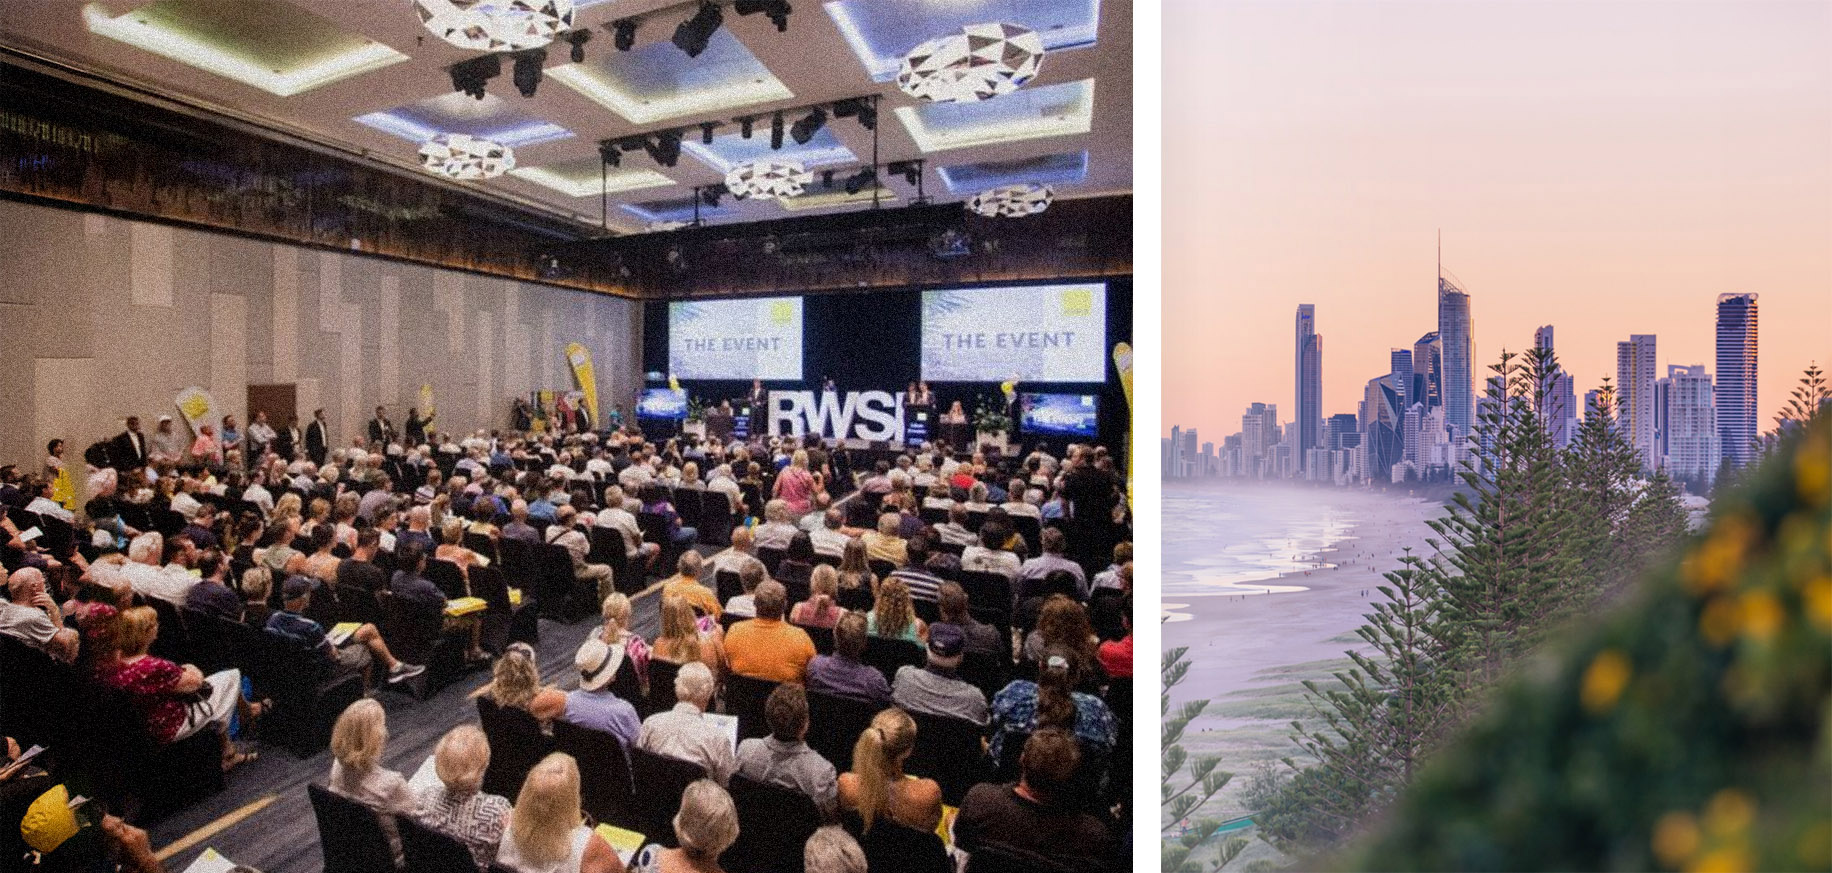 Conceived by Ray White Surfers Paradise under the guidance of Principal Andrew Bell OAM, The Event strategically aligns with the peak tourist season on the Gold Coast